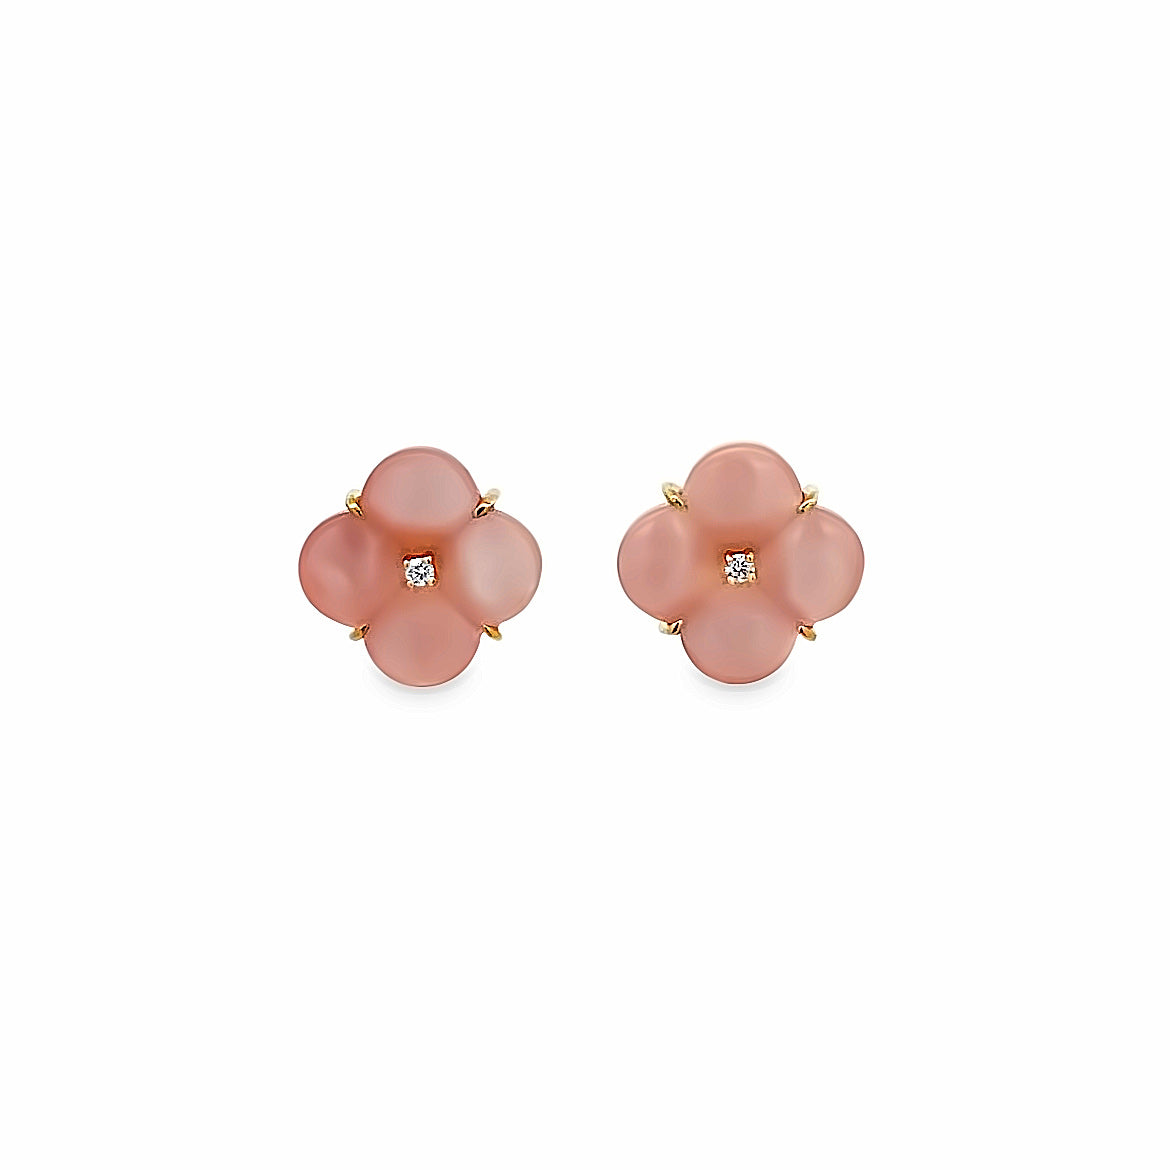 18K GOLD FLOWE MEDIUM EARRINGS WITH PINK MOTHER OF PEARL